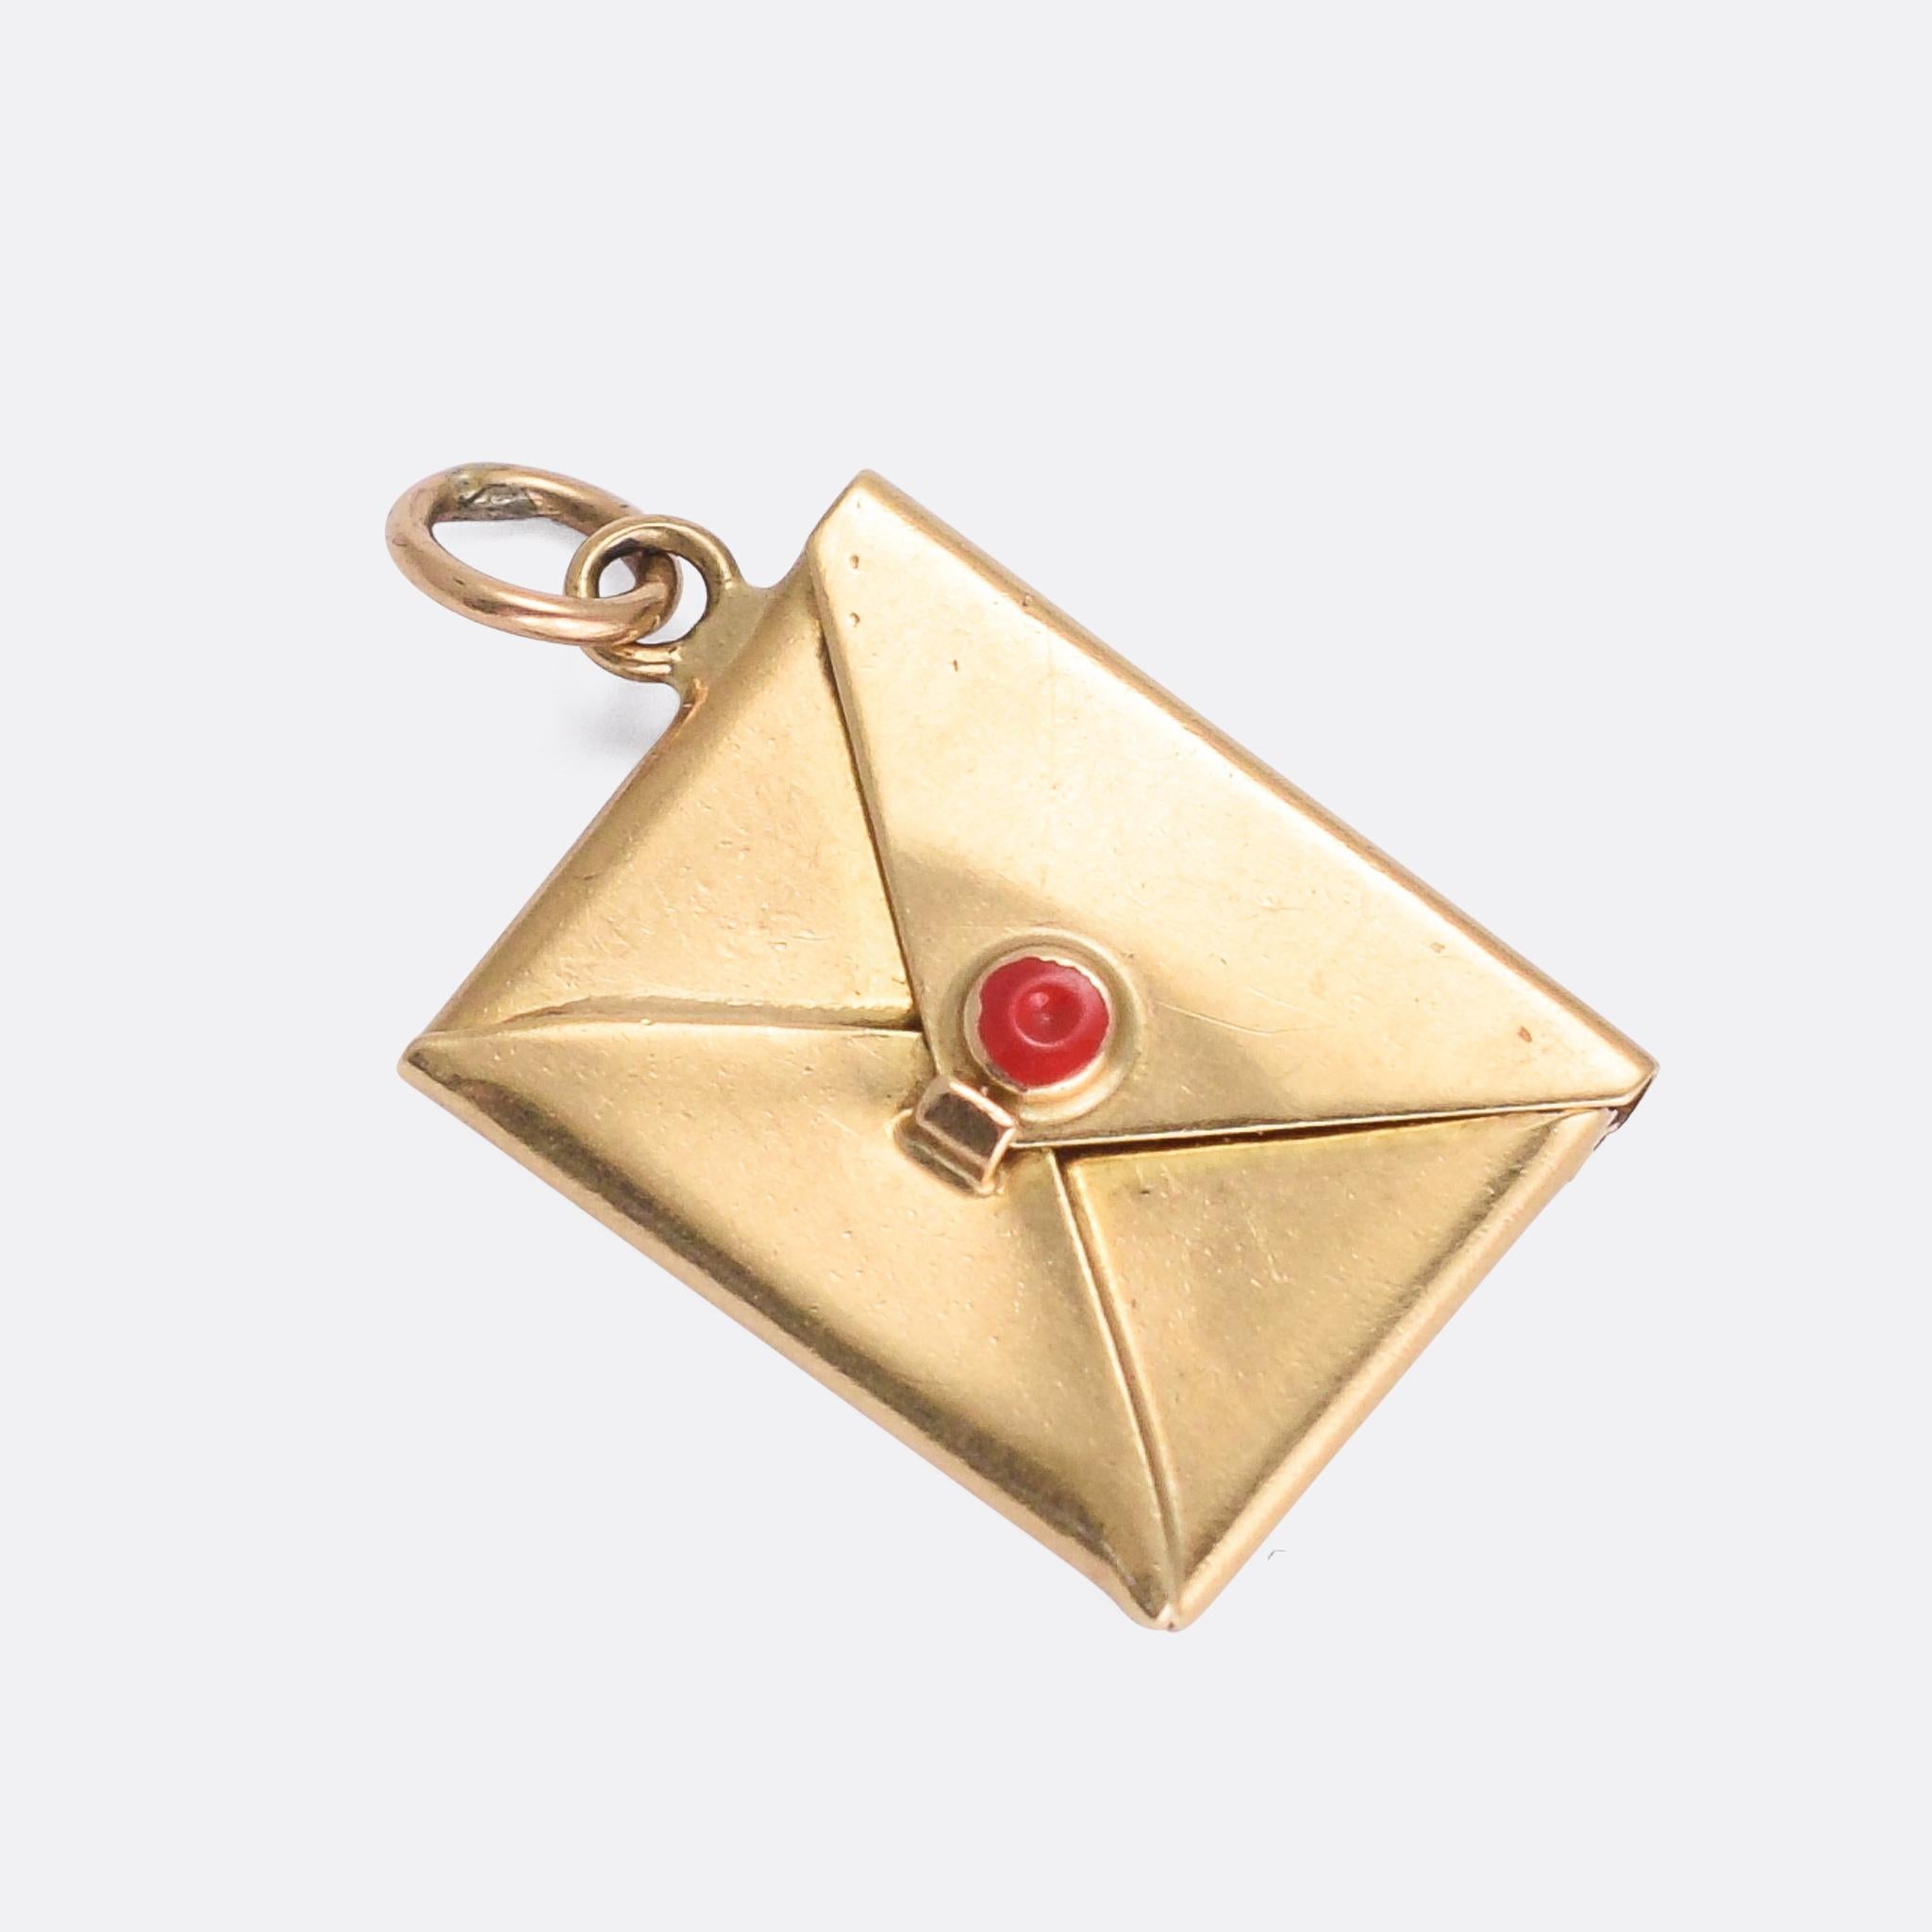 A sweet vintage envelope charm dating from the 1950s. It features enamelled seal wax on the flap, which opens to reveal a small compartment space within. With clear London hallmarks dating in to 1959.

MEASUREMENTS 
1.2 x 1.7cm

WEIGHT 
1.3g

MARKS